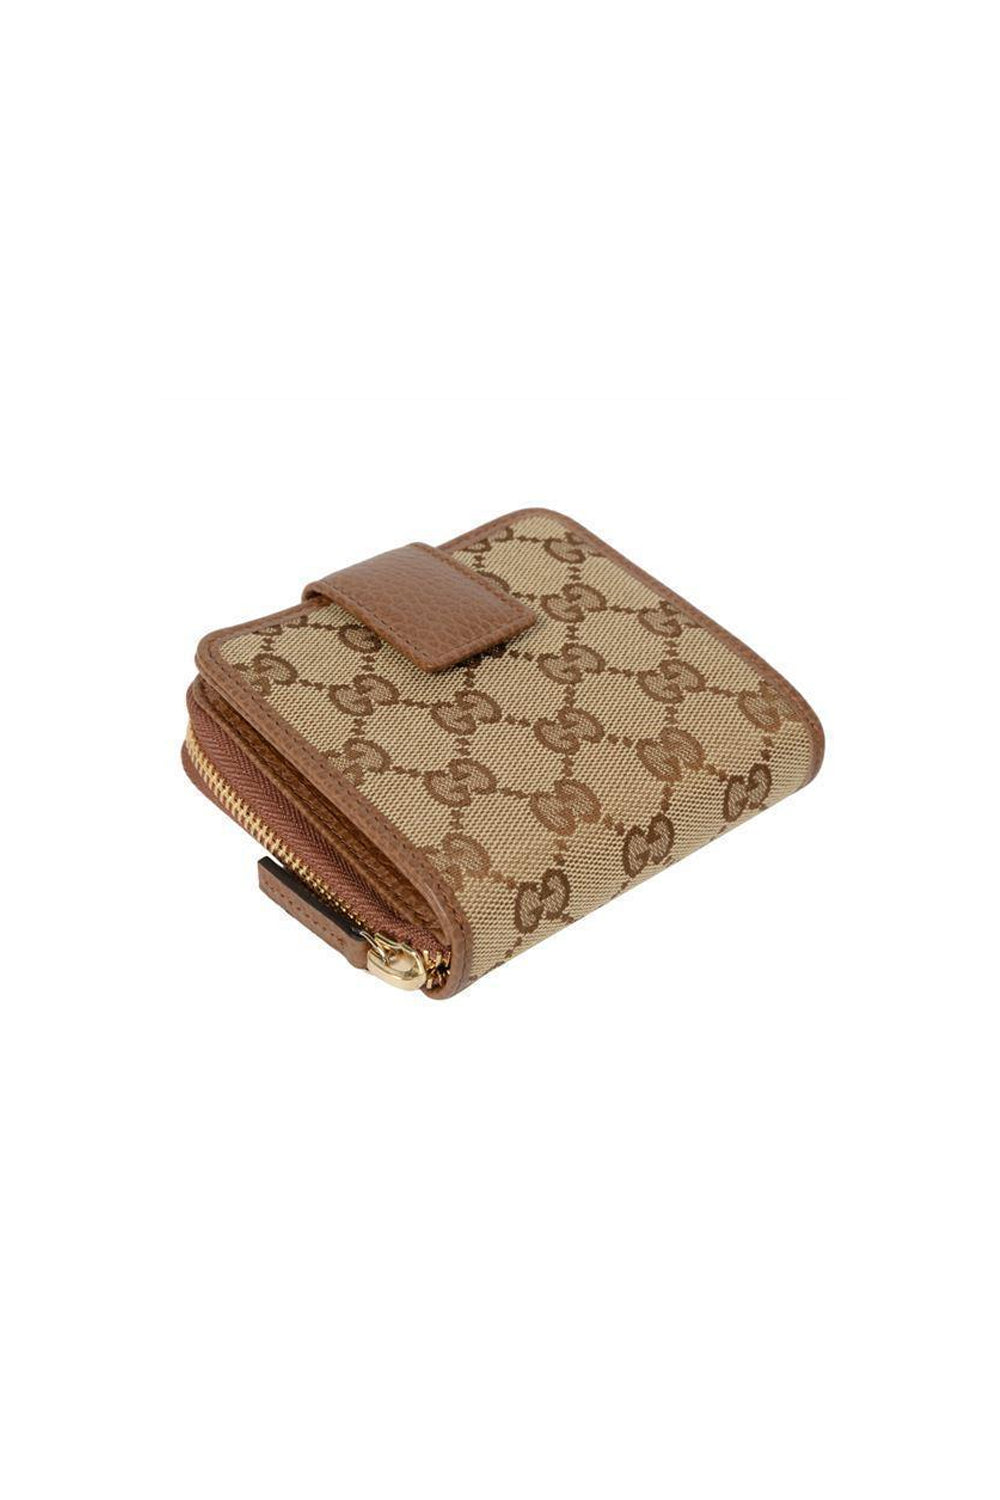 Gucci GG Canvas Brown Leather Trim Wallet